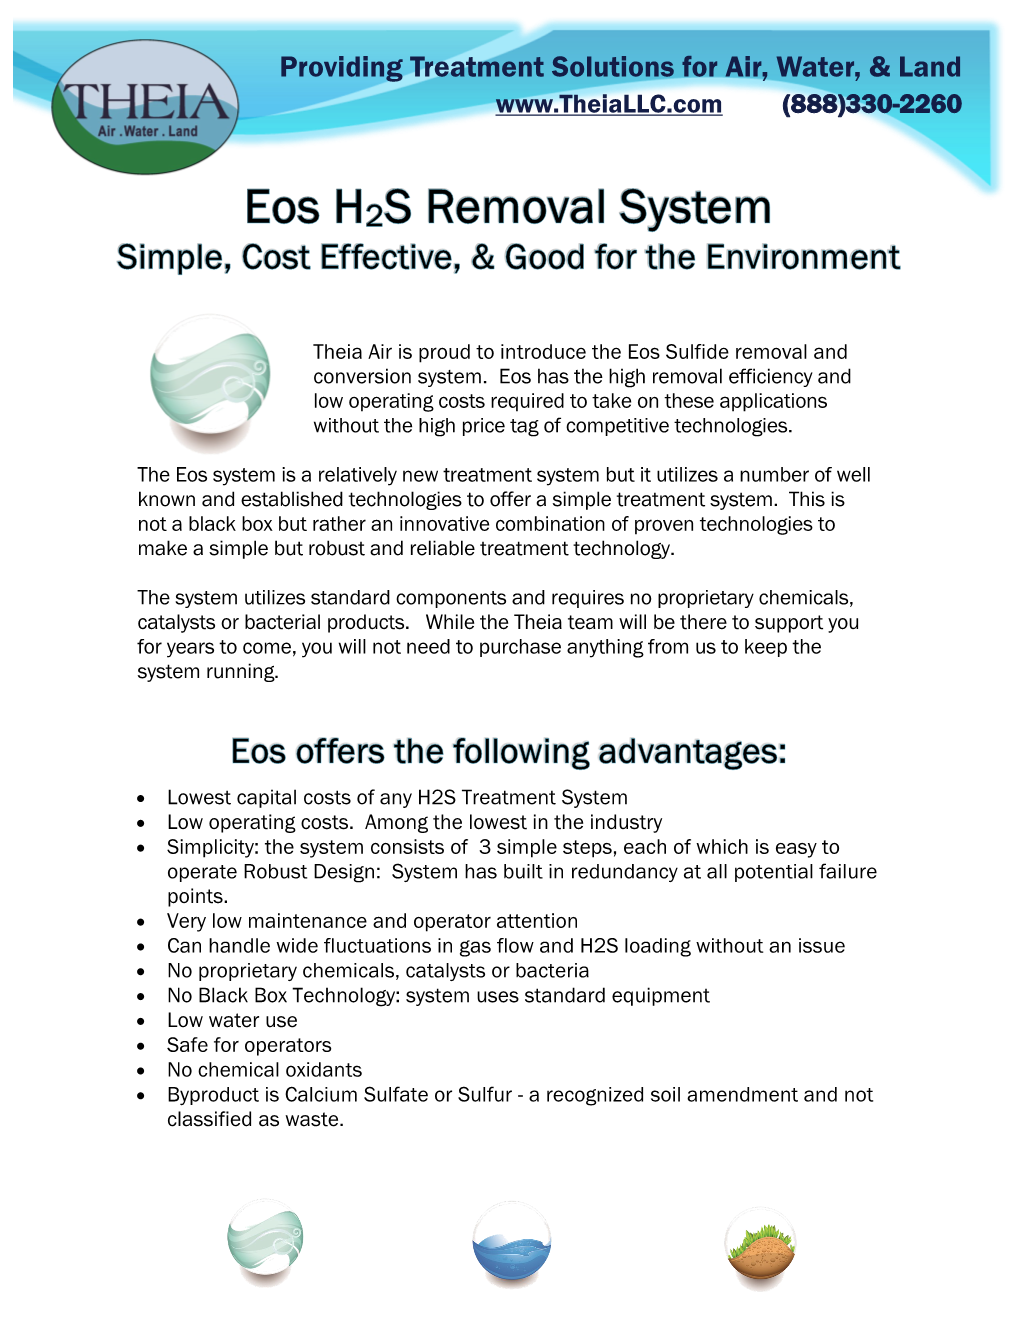 Eos Sulfide Removal and Conversion System